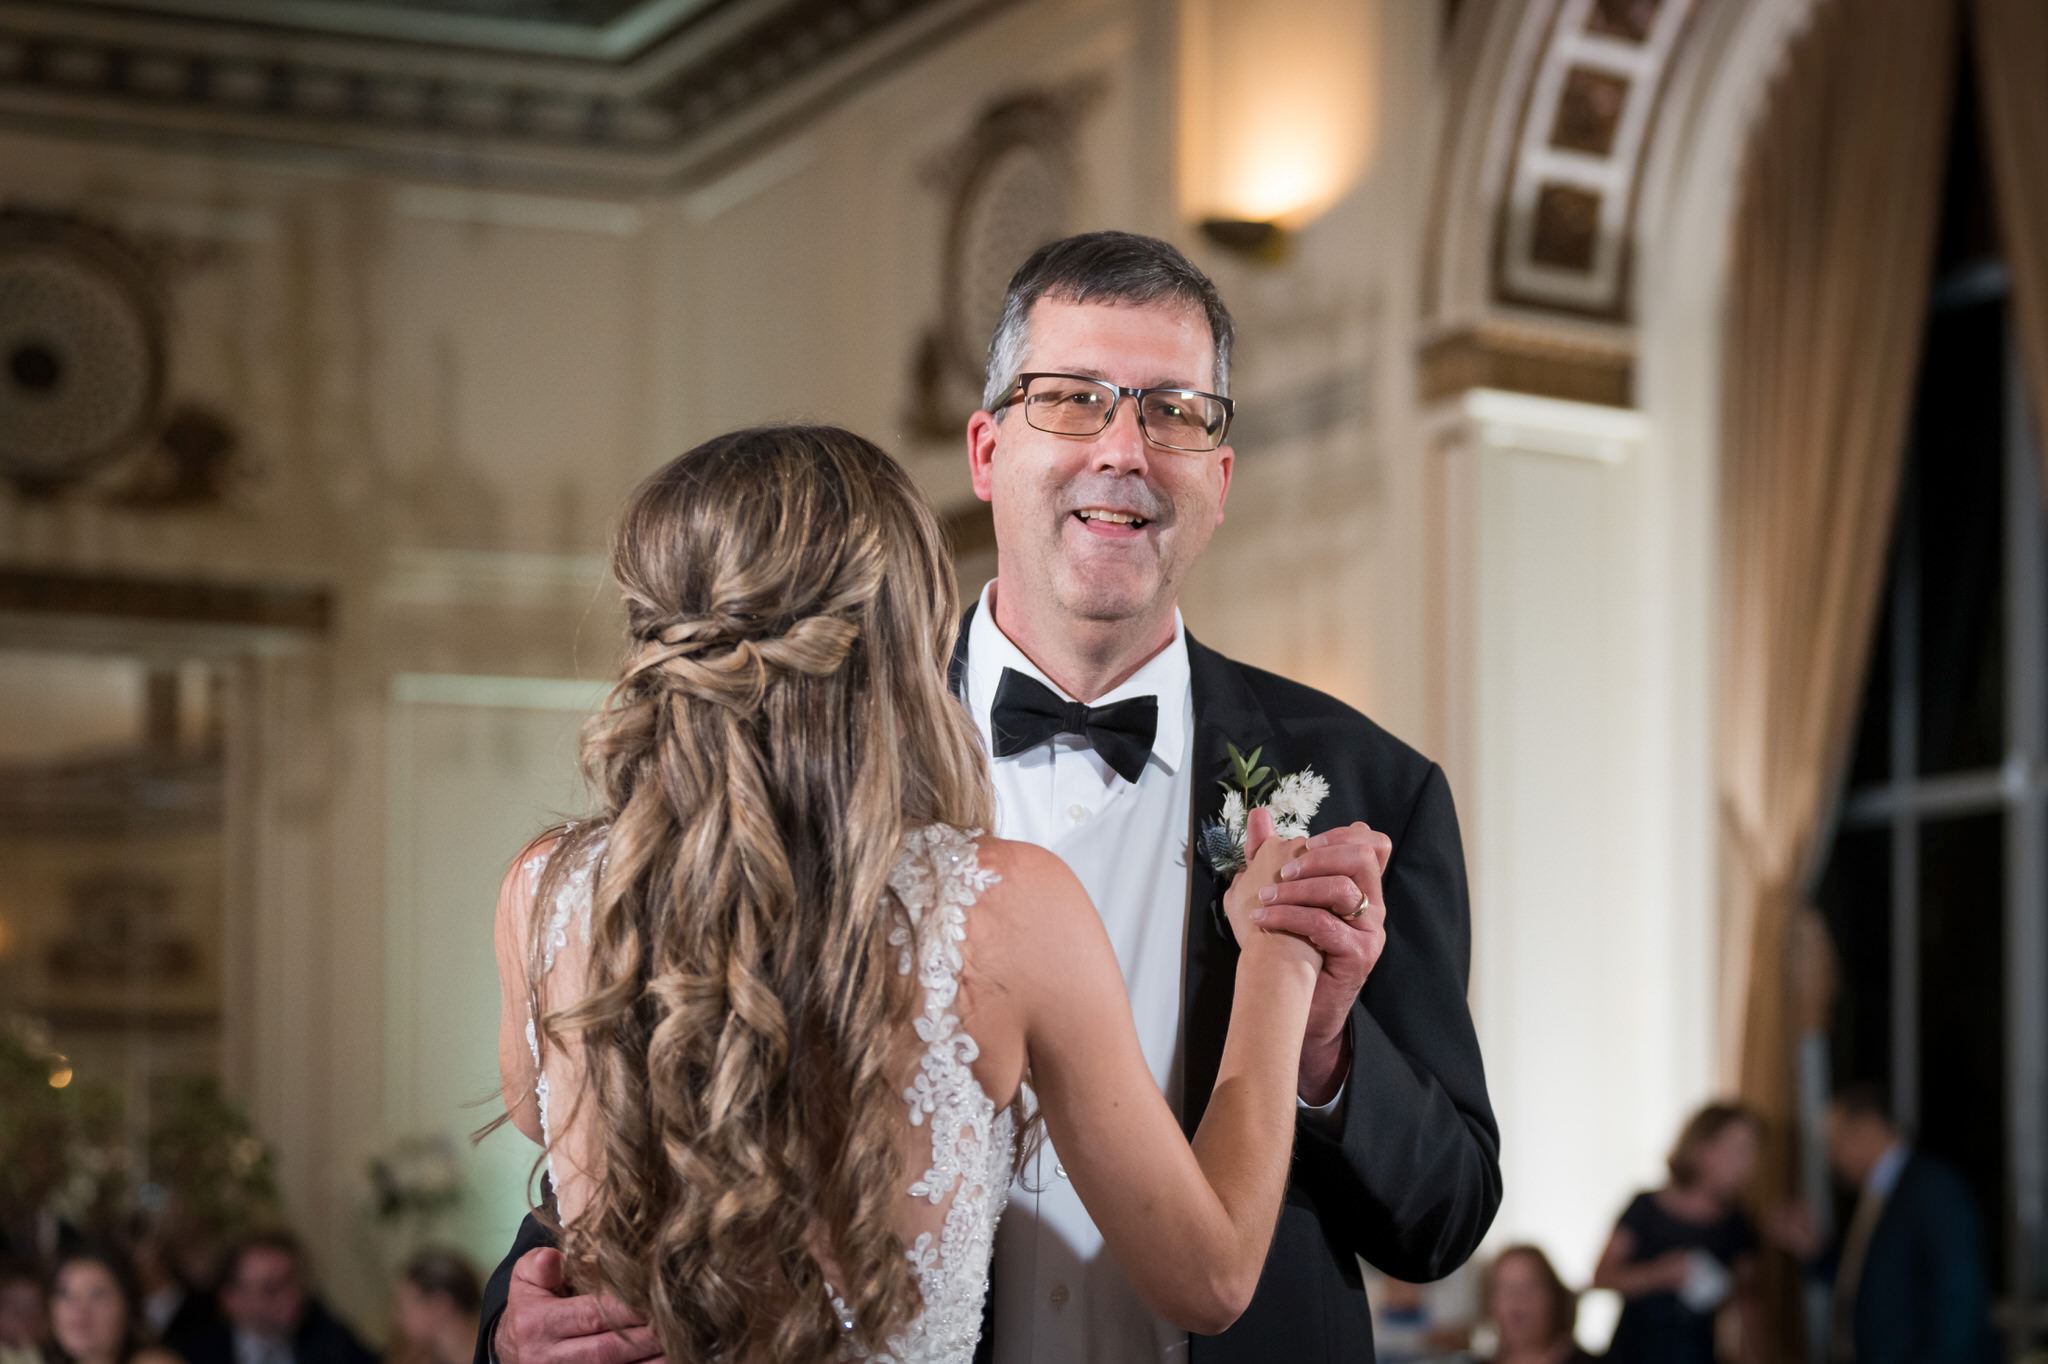 The father of the bride dances with his daughter at a wedding at Detroit's Colony Club.